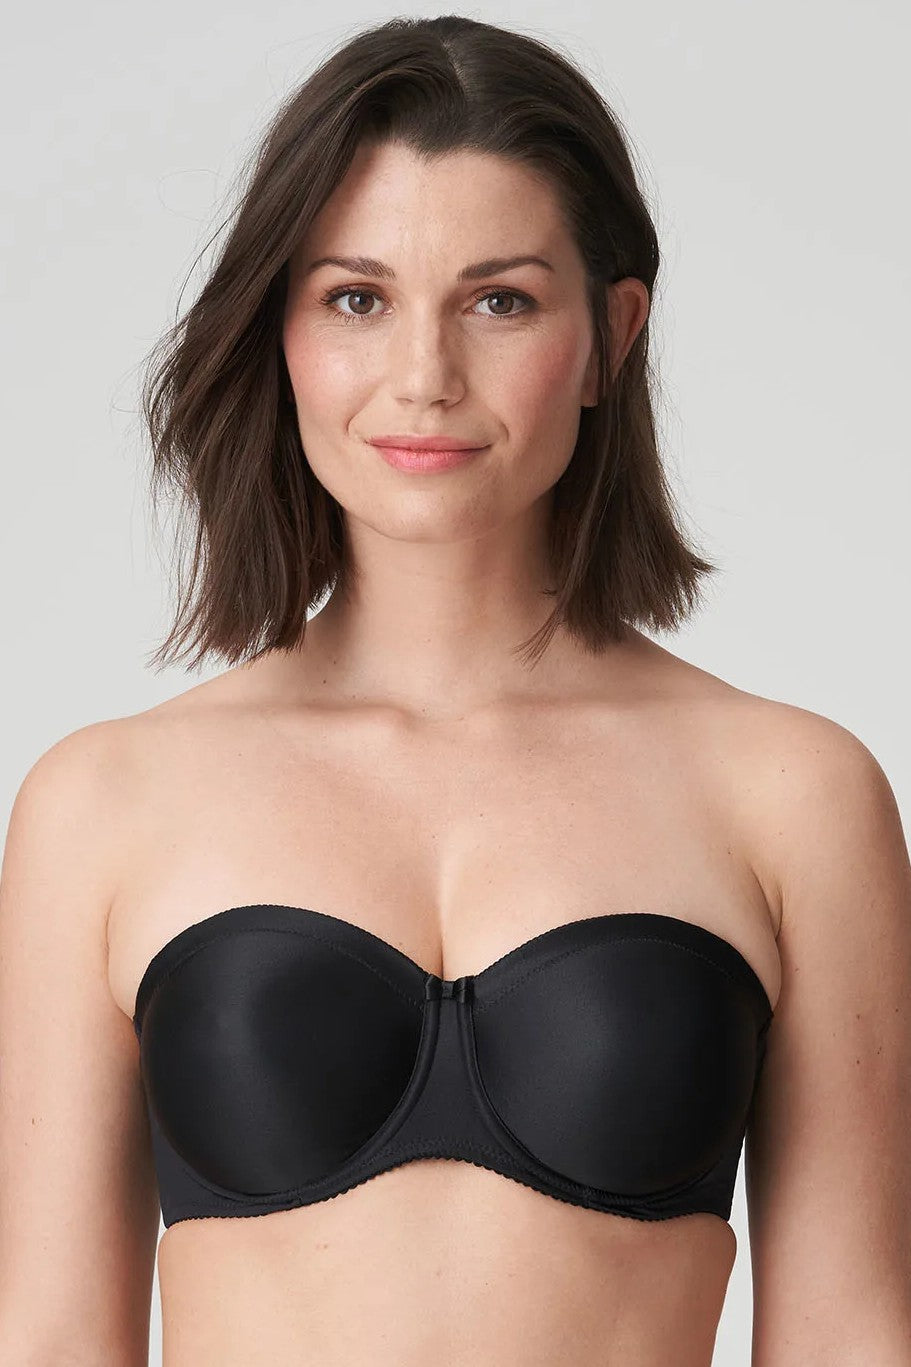 AISILIN Women's Strapless Bras Big Busted Support Lightly Padded